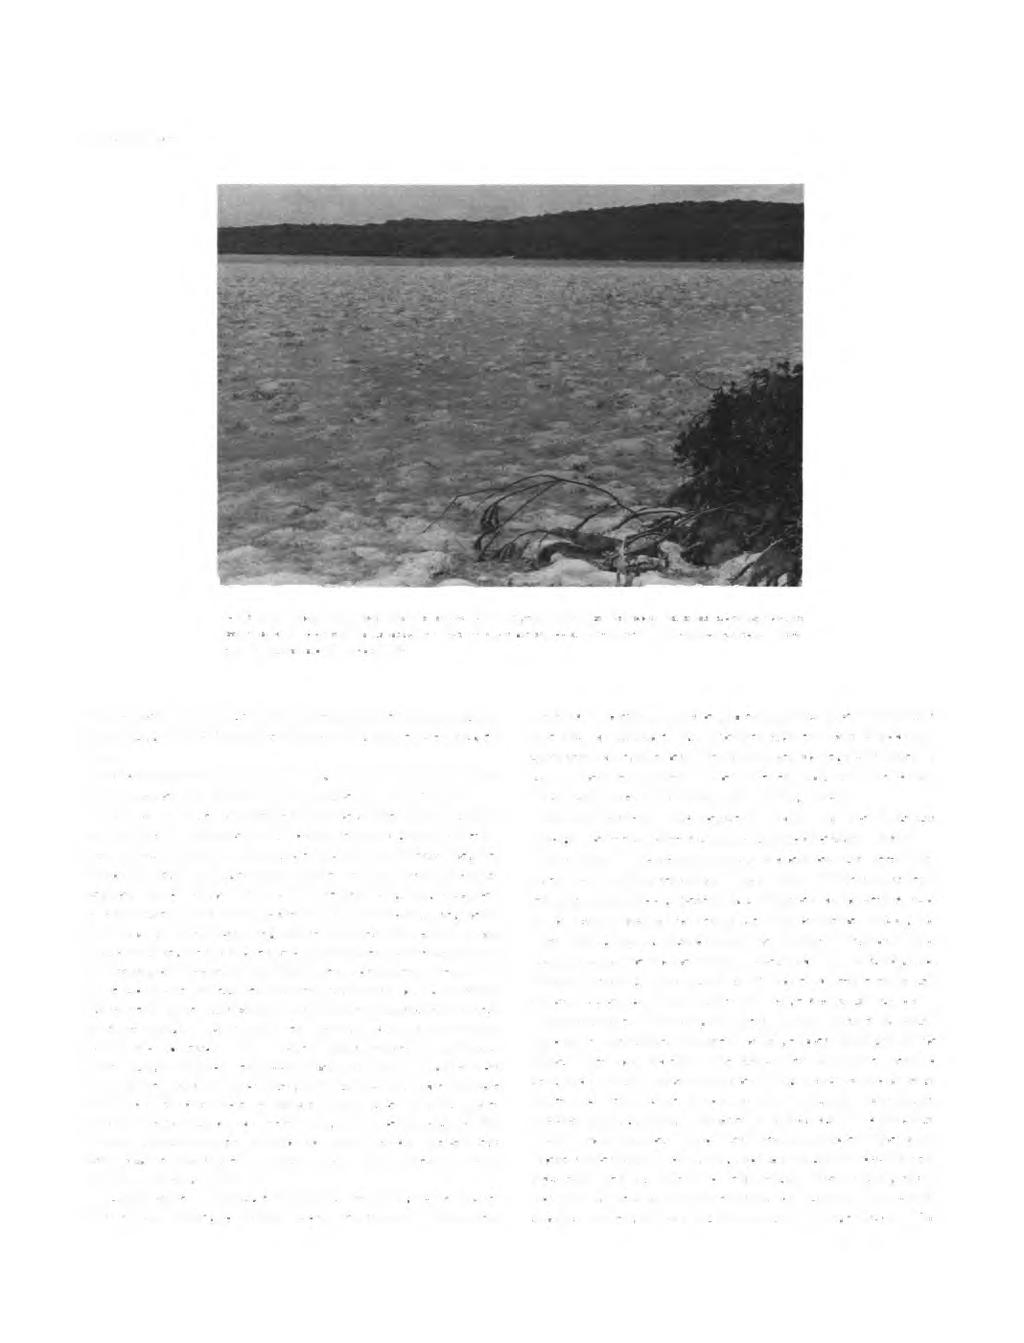 NUMBER 544 FIGURE 31. View of exposed tidal flat at low tide in Pigeon Creek, San Salvador, Bahamas, showing mounds cast up around mouths of callianassid burrows.